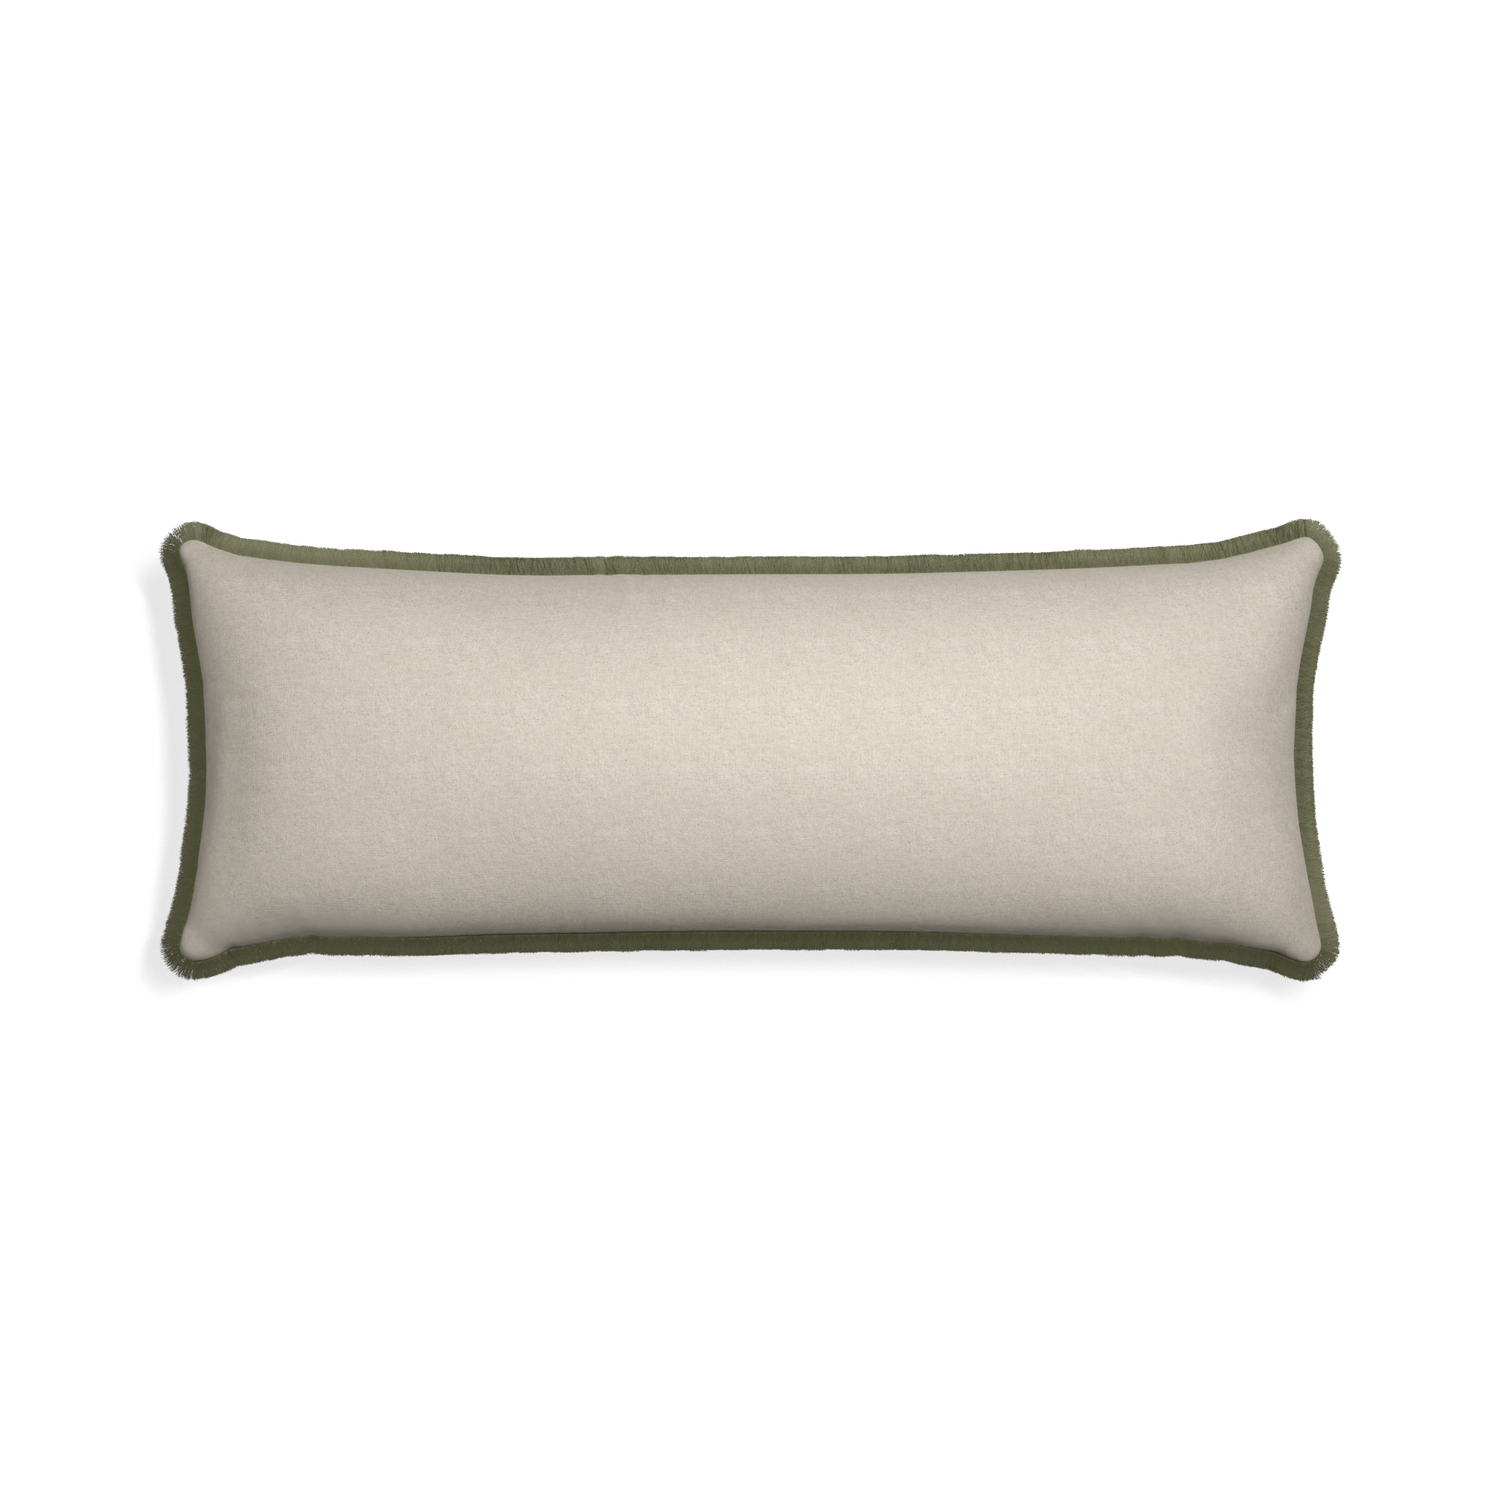 Xl-lumbar oat custom light brownpillow with sage fringe on white background